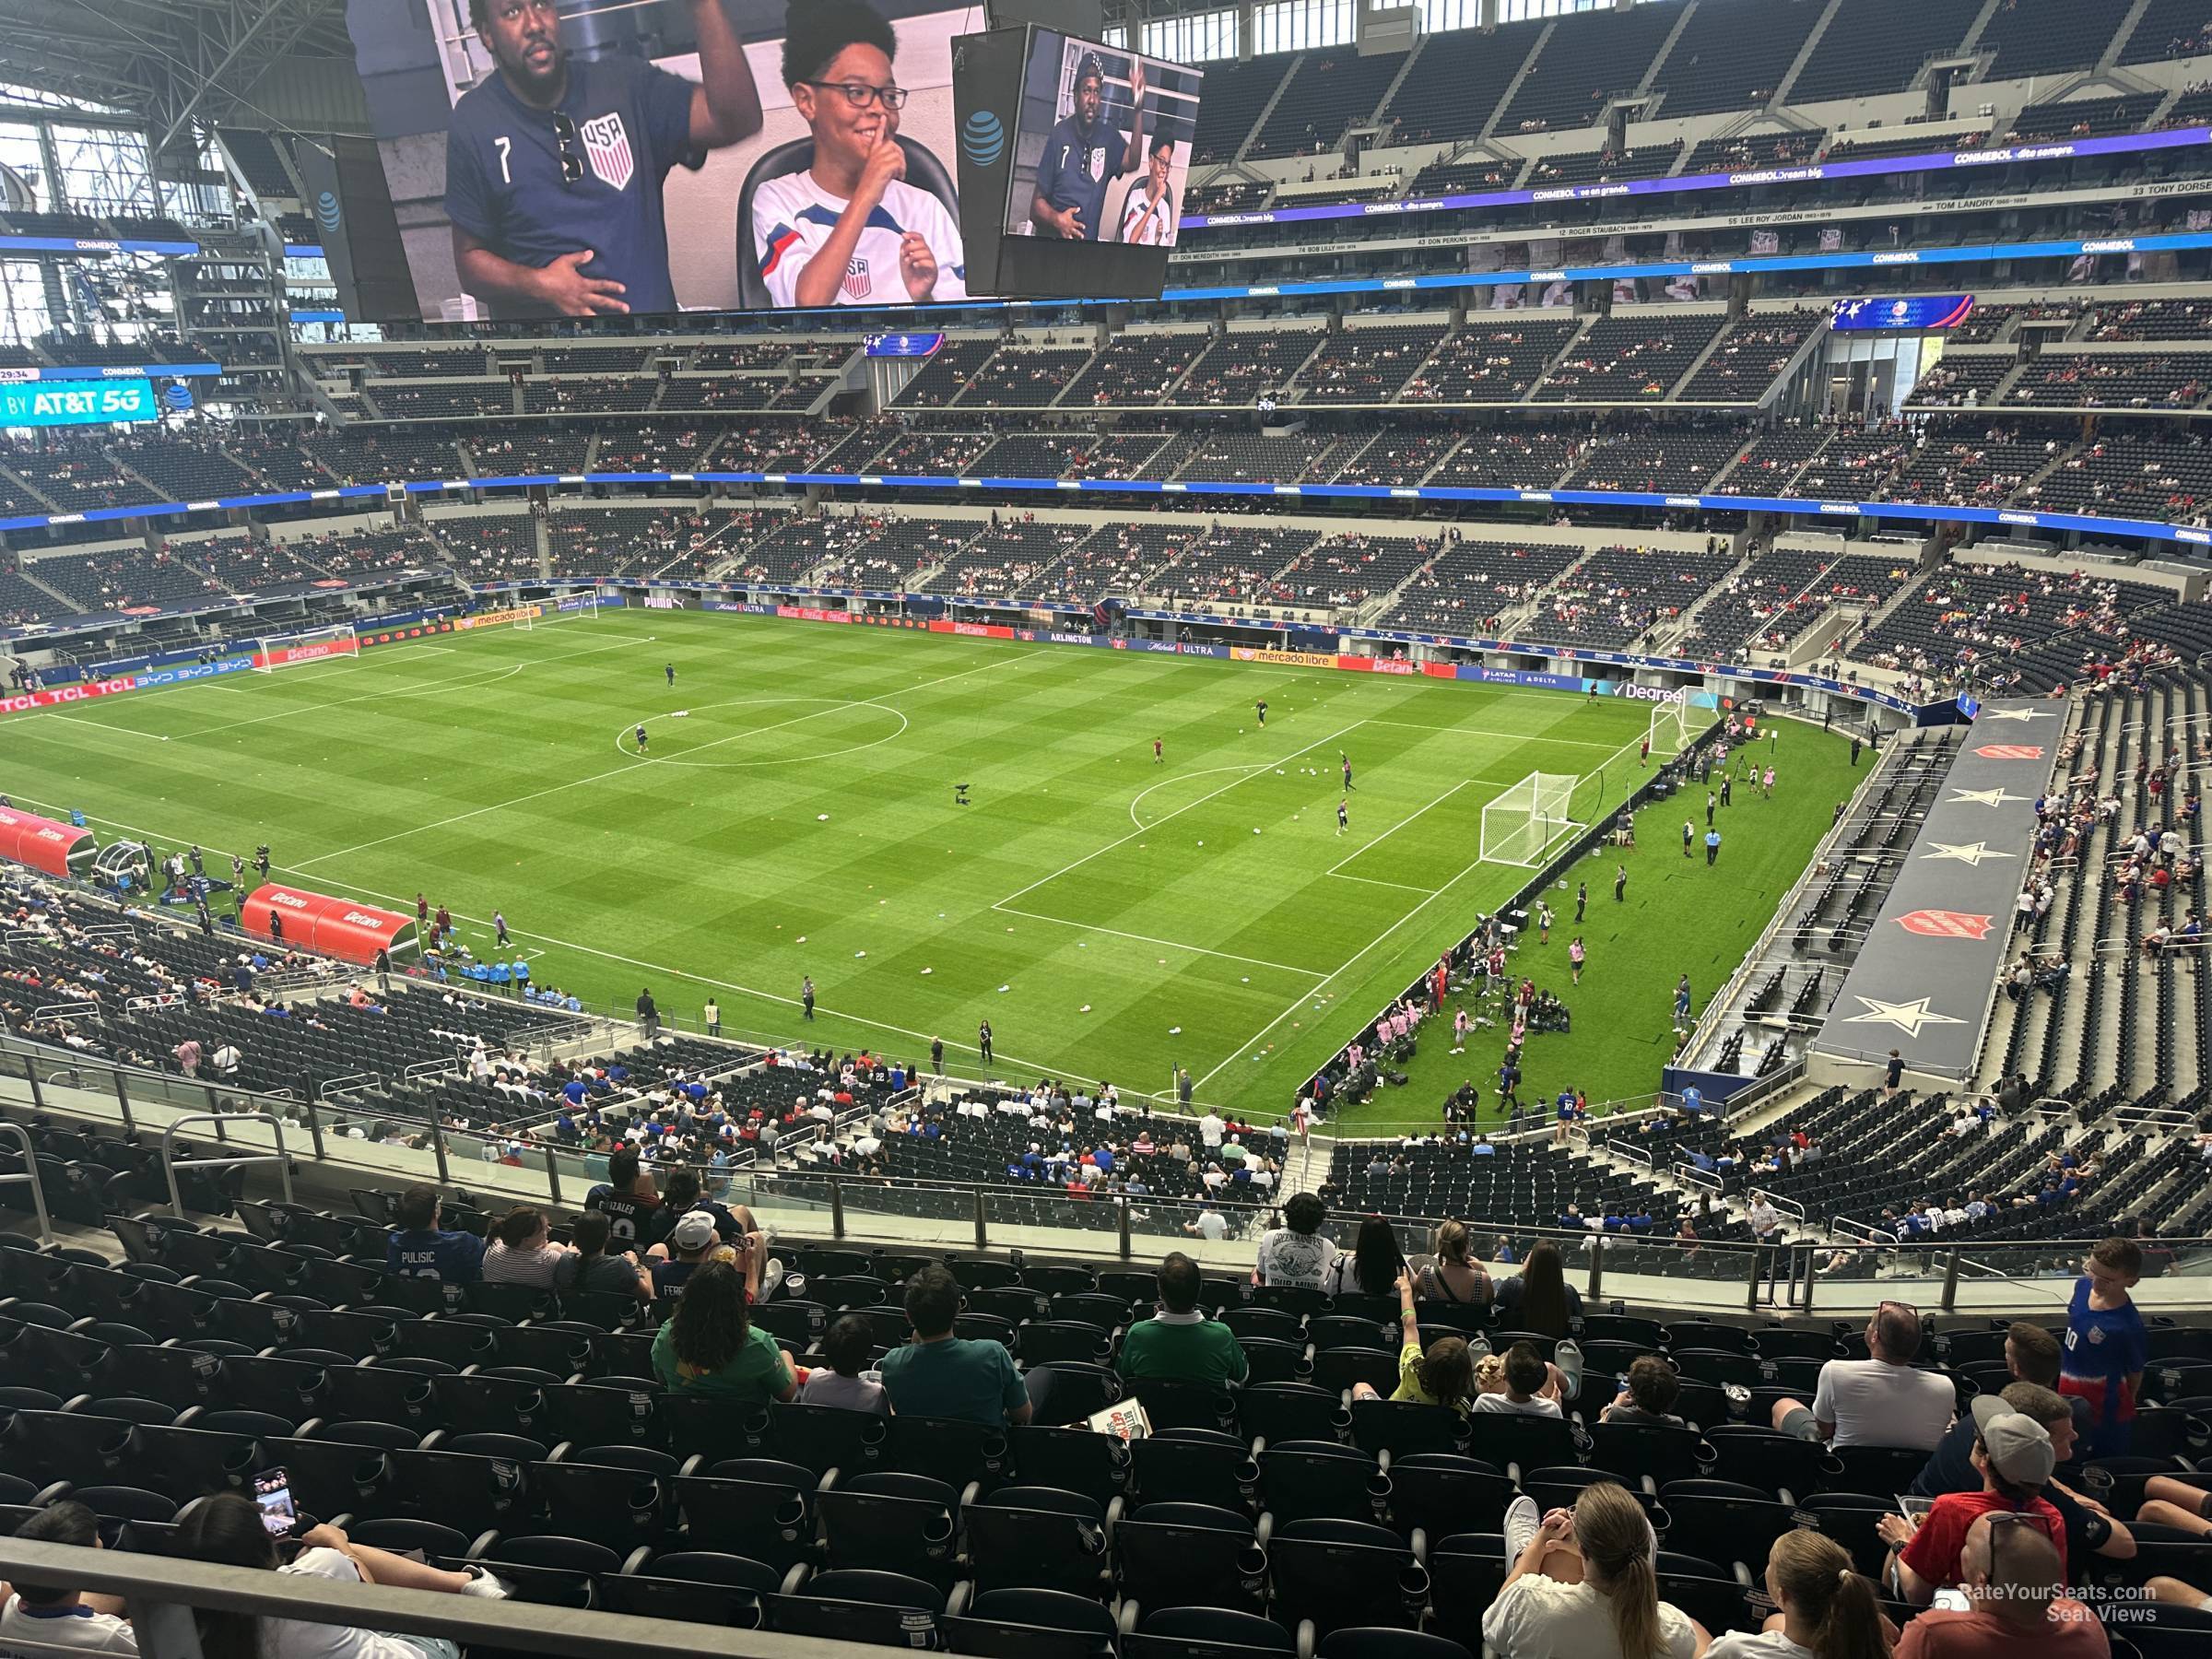 section 329, row 12 seat view  for soccer - at&t stadium (cowboys stadium)